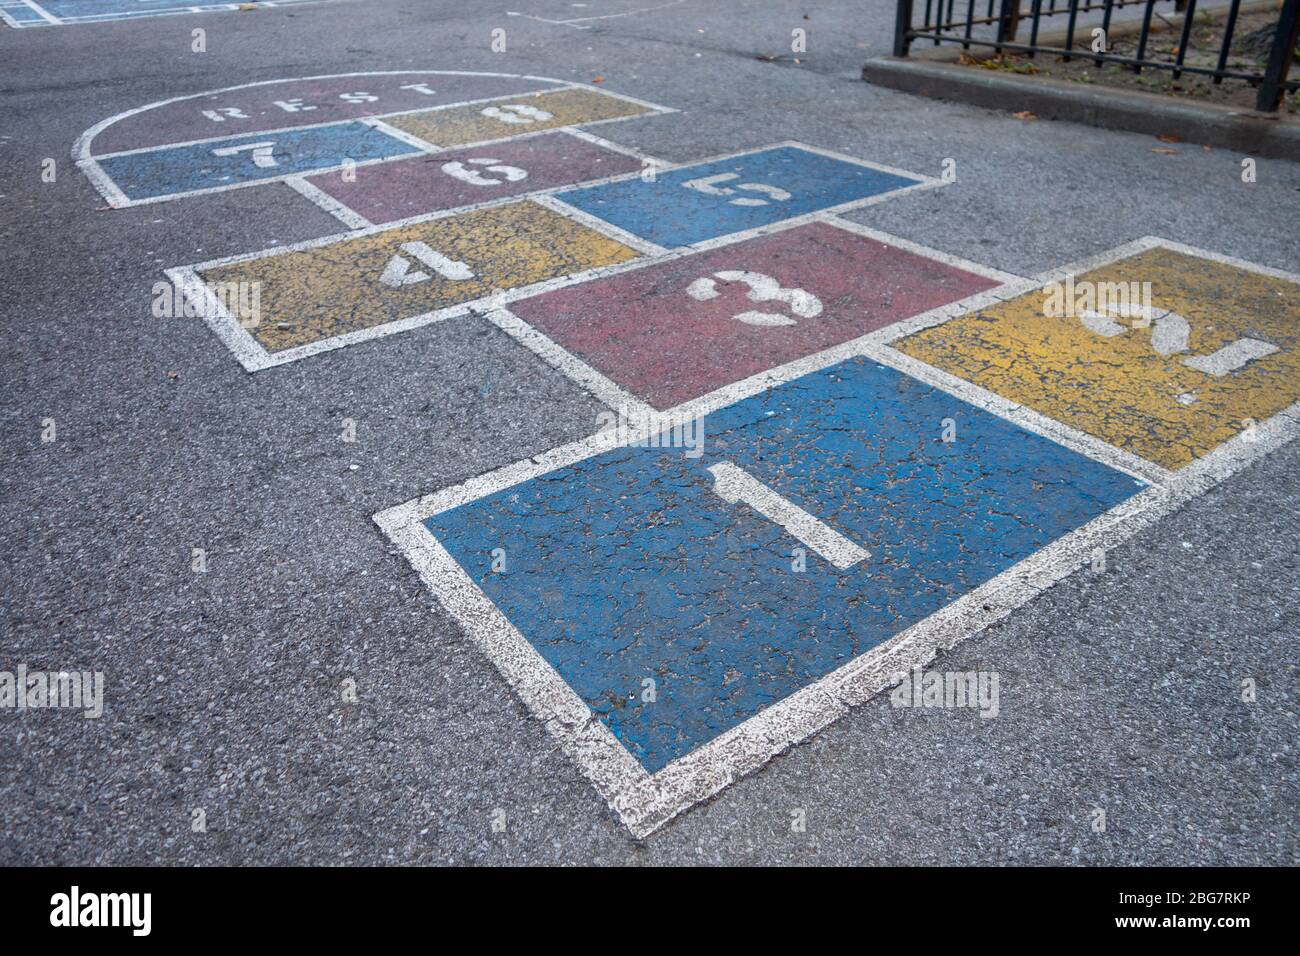 hop-scotch childern's game on school yard asphalt with colored squares Stock Photo